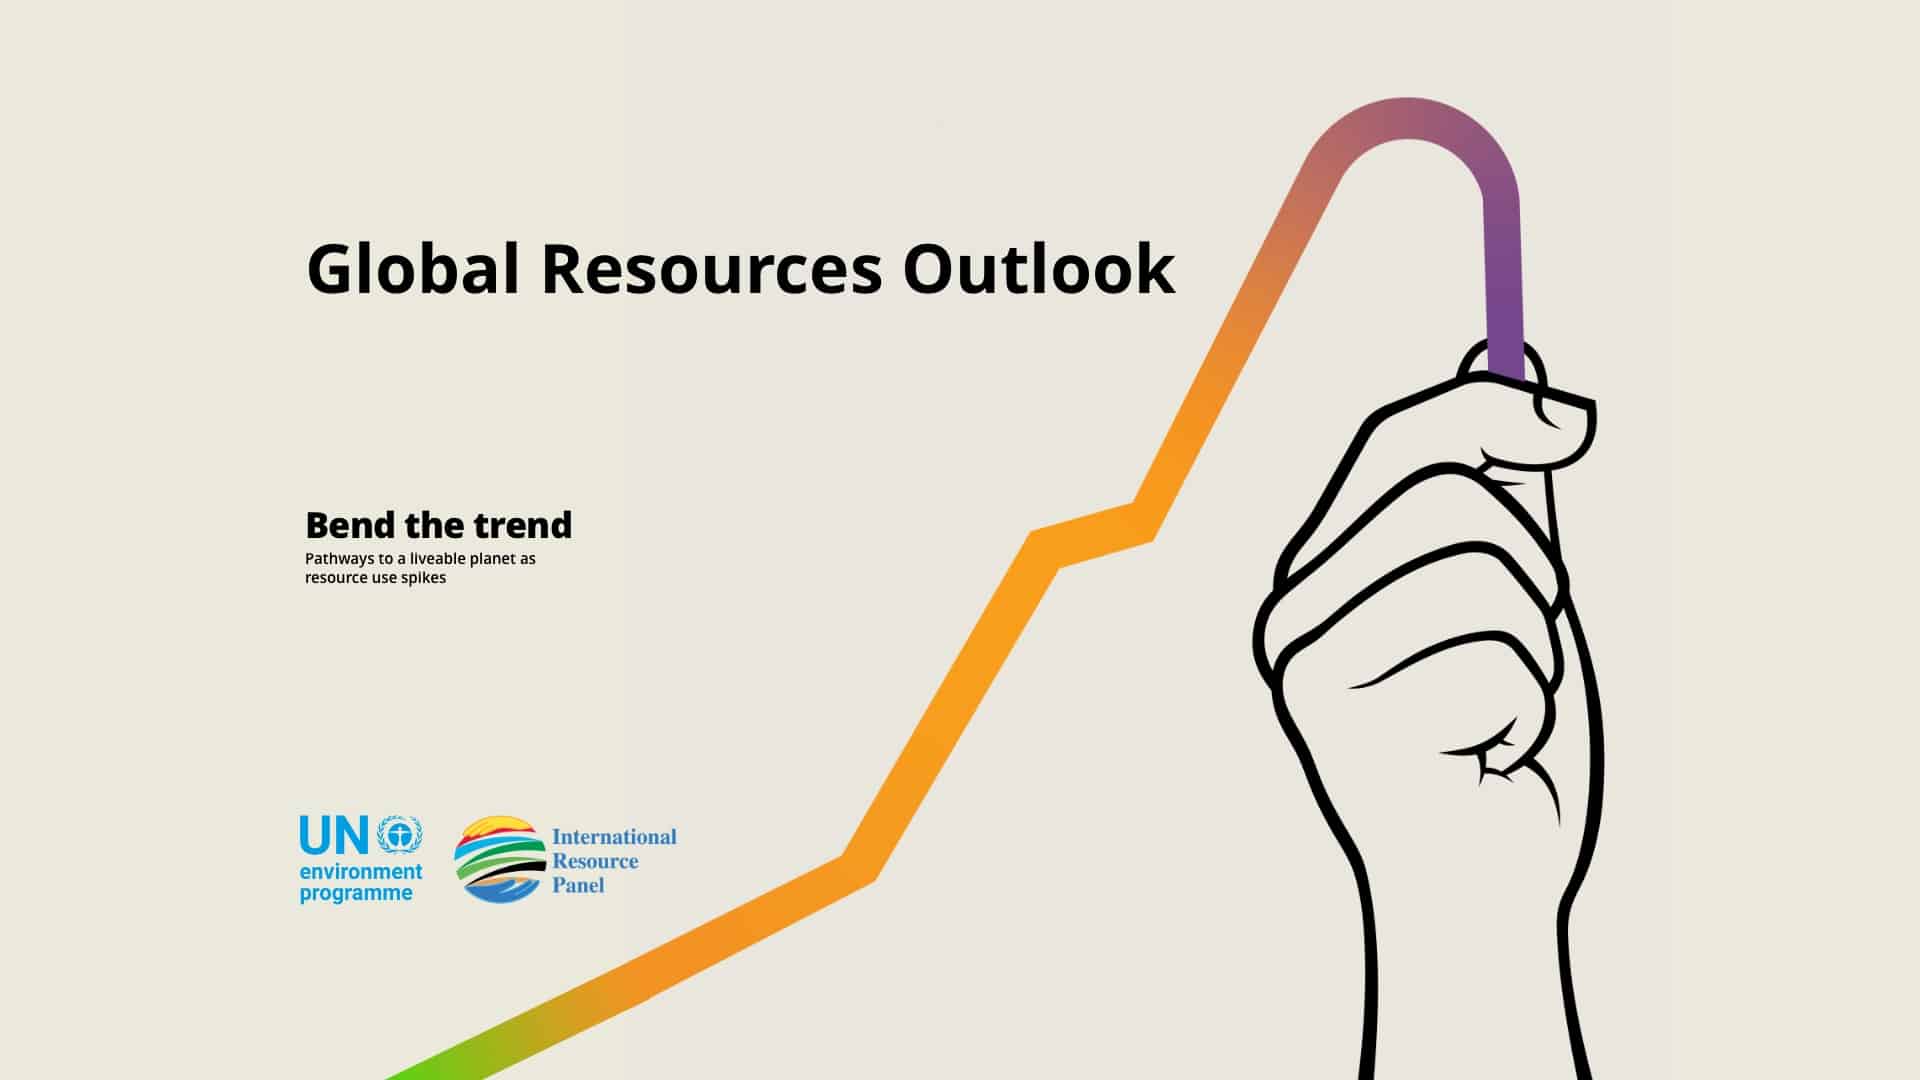 thefuture, Resurs, Global Resources Outlook